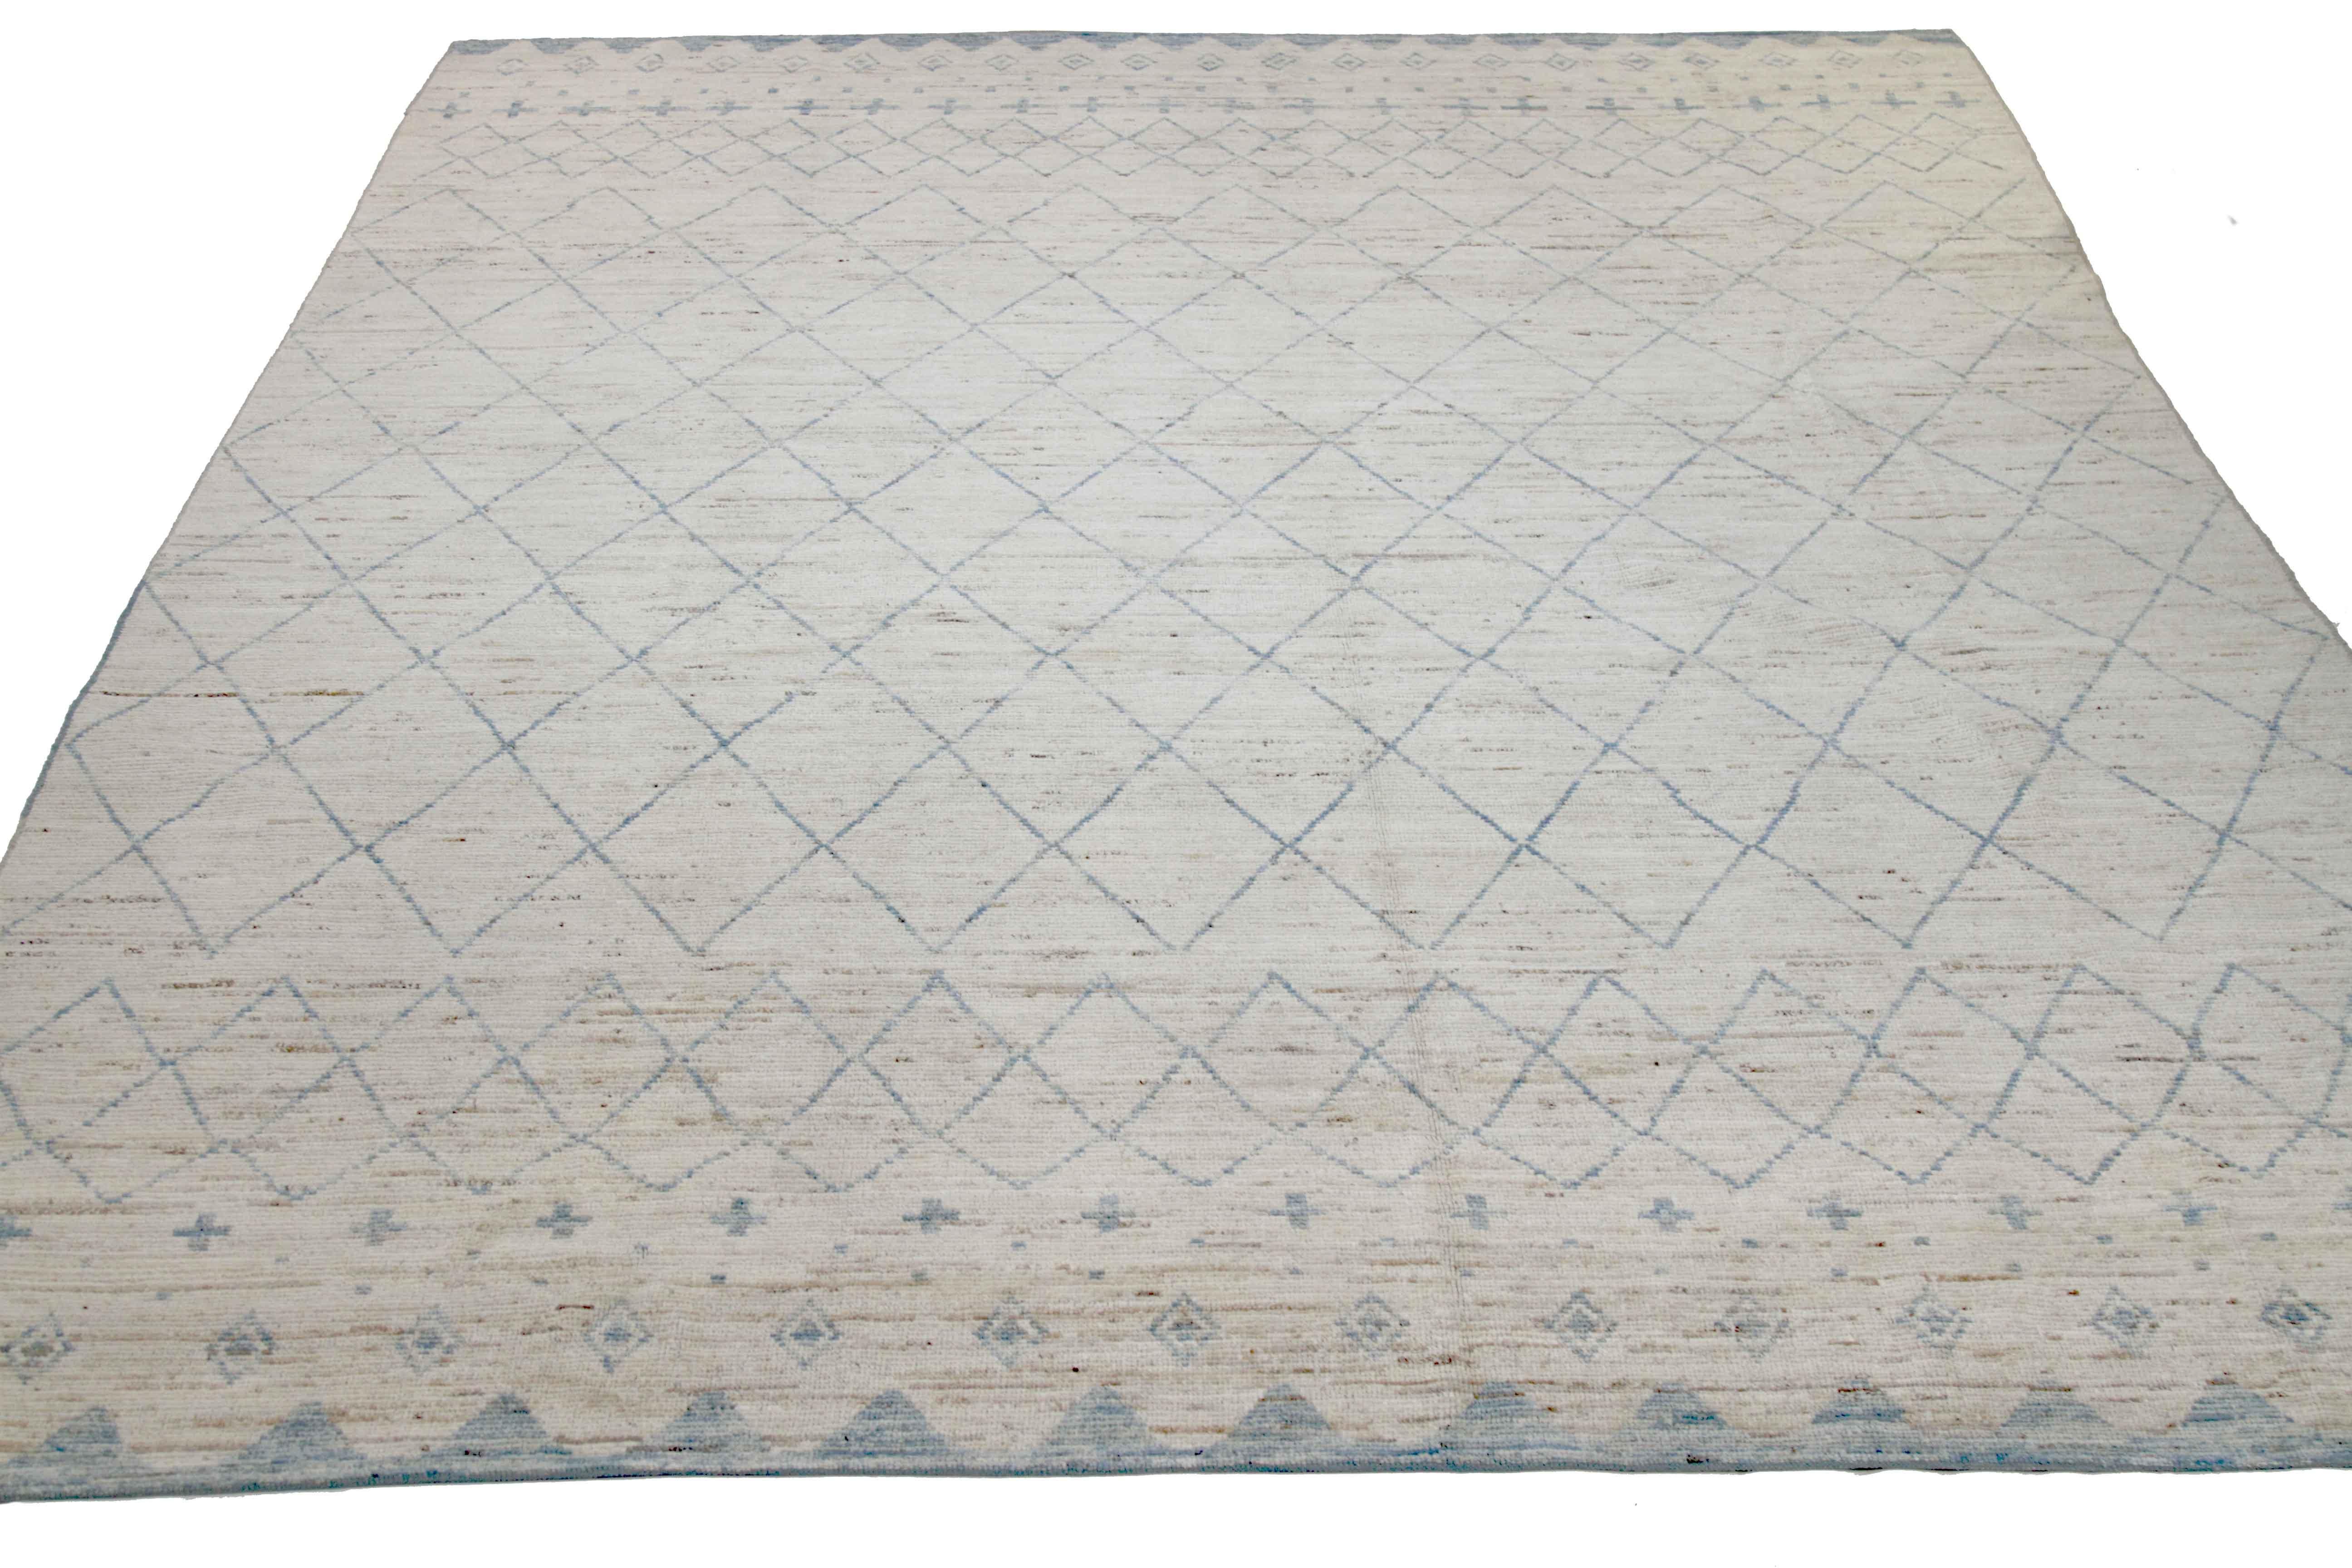 Modern Afghan rug handwoven from the finest sheep’s wool. It’s colored with all-natural vegetable dyes that are safe for humans and pets. This piece is a traditional Afghan weaving featuring a Moroccan inspired design. It’s highlighted by blue